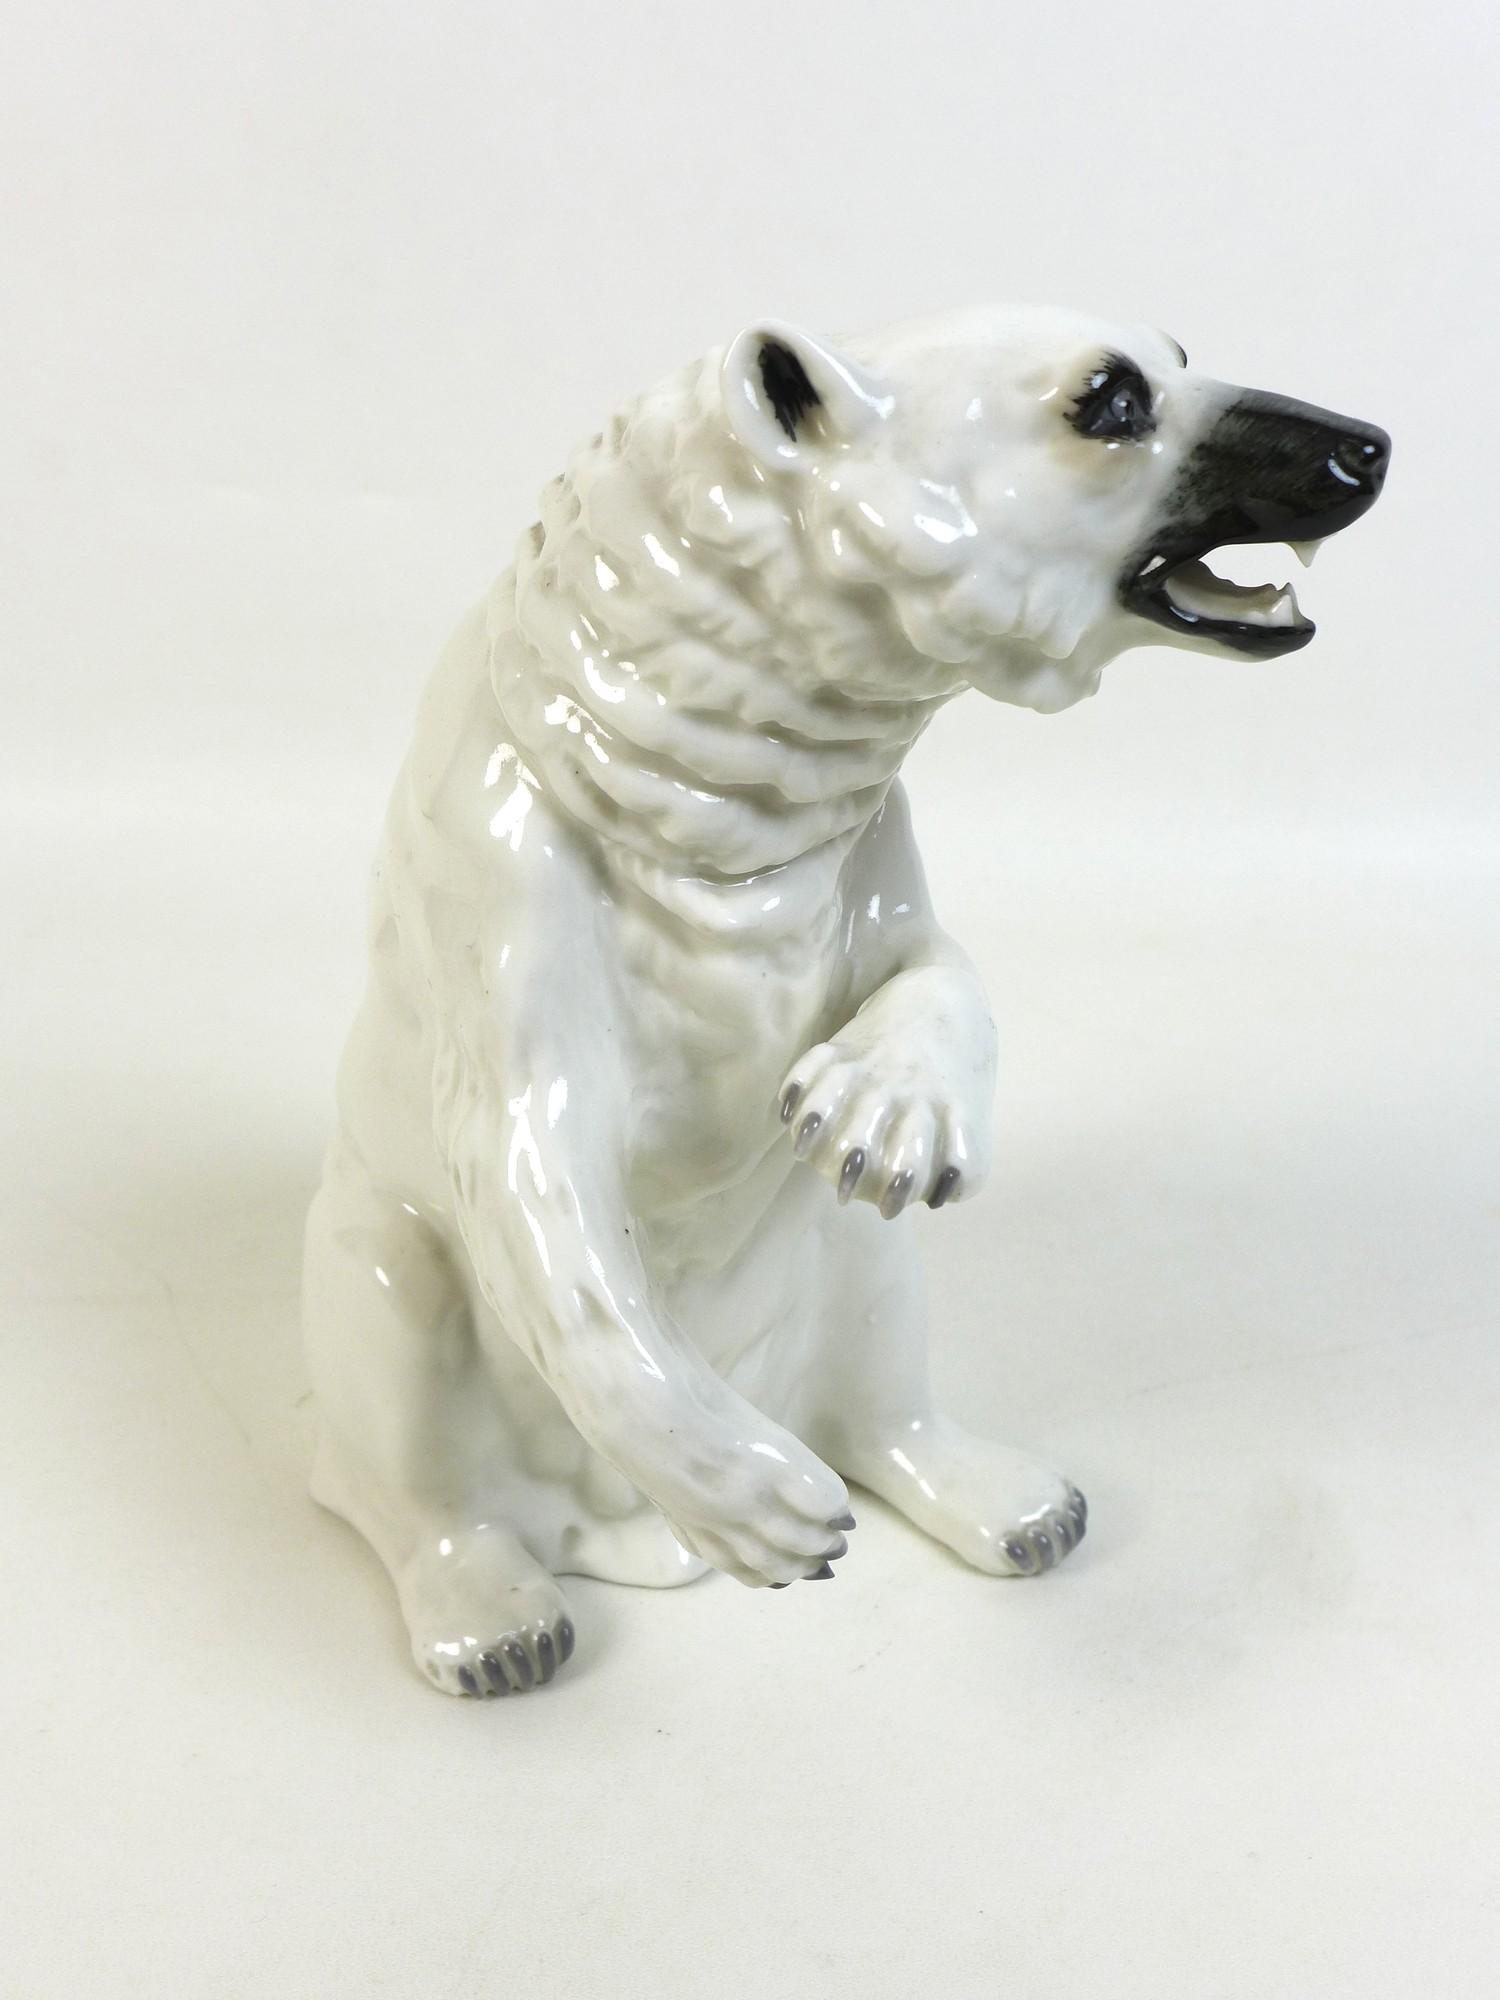 A 20th century Sitzendorf Polar bear figurine, the bear posed bearing teeth and rearing up from - Image 2 of 9